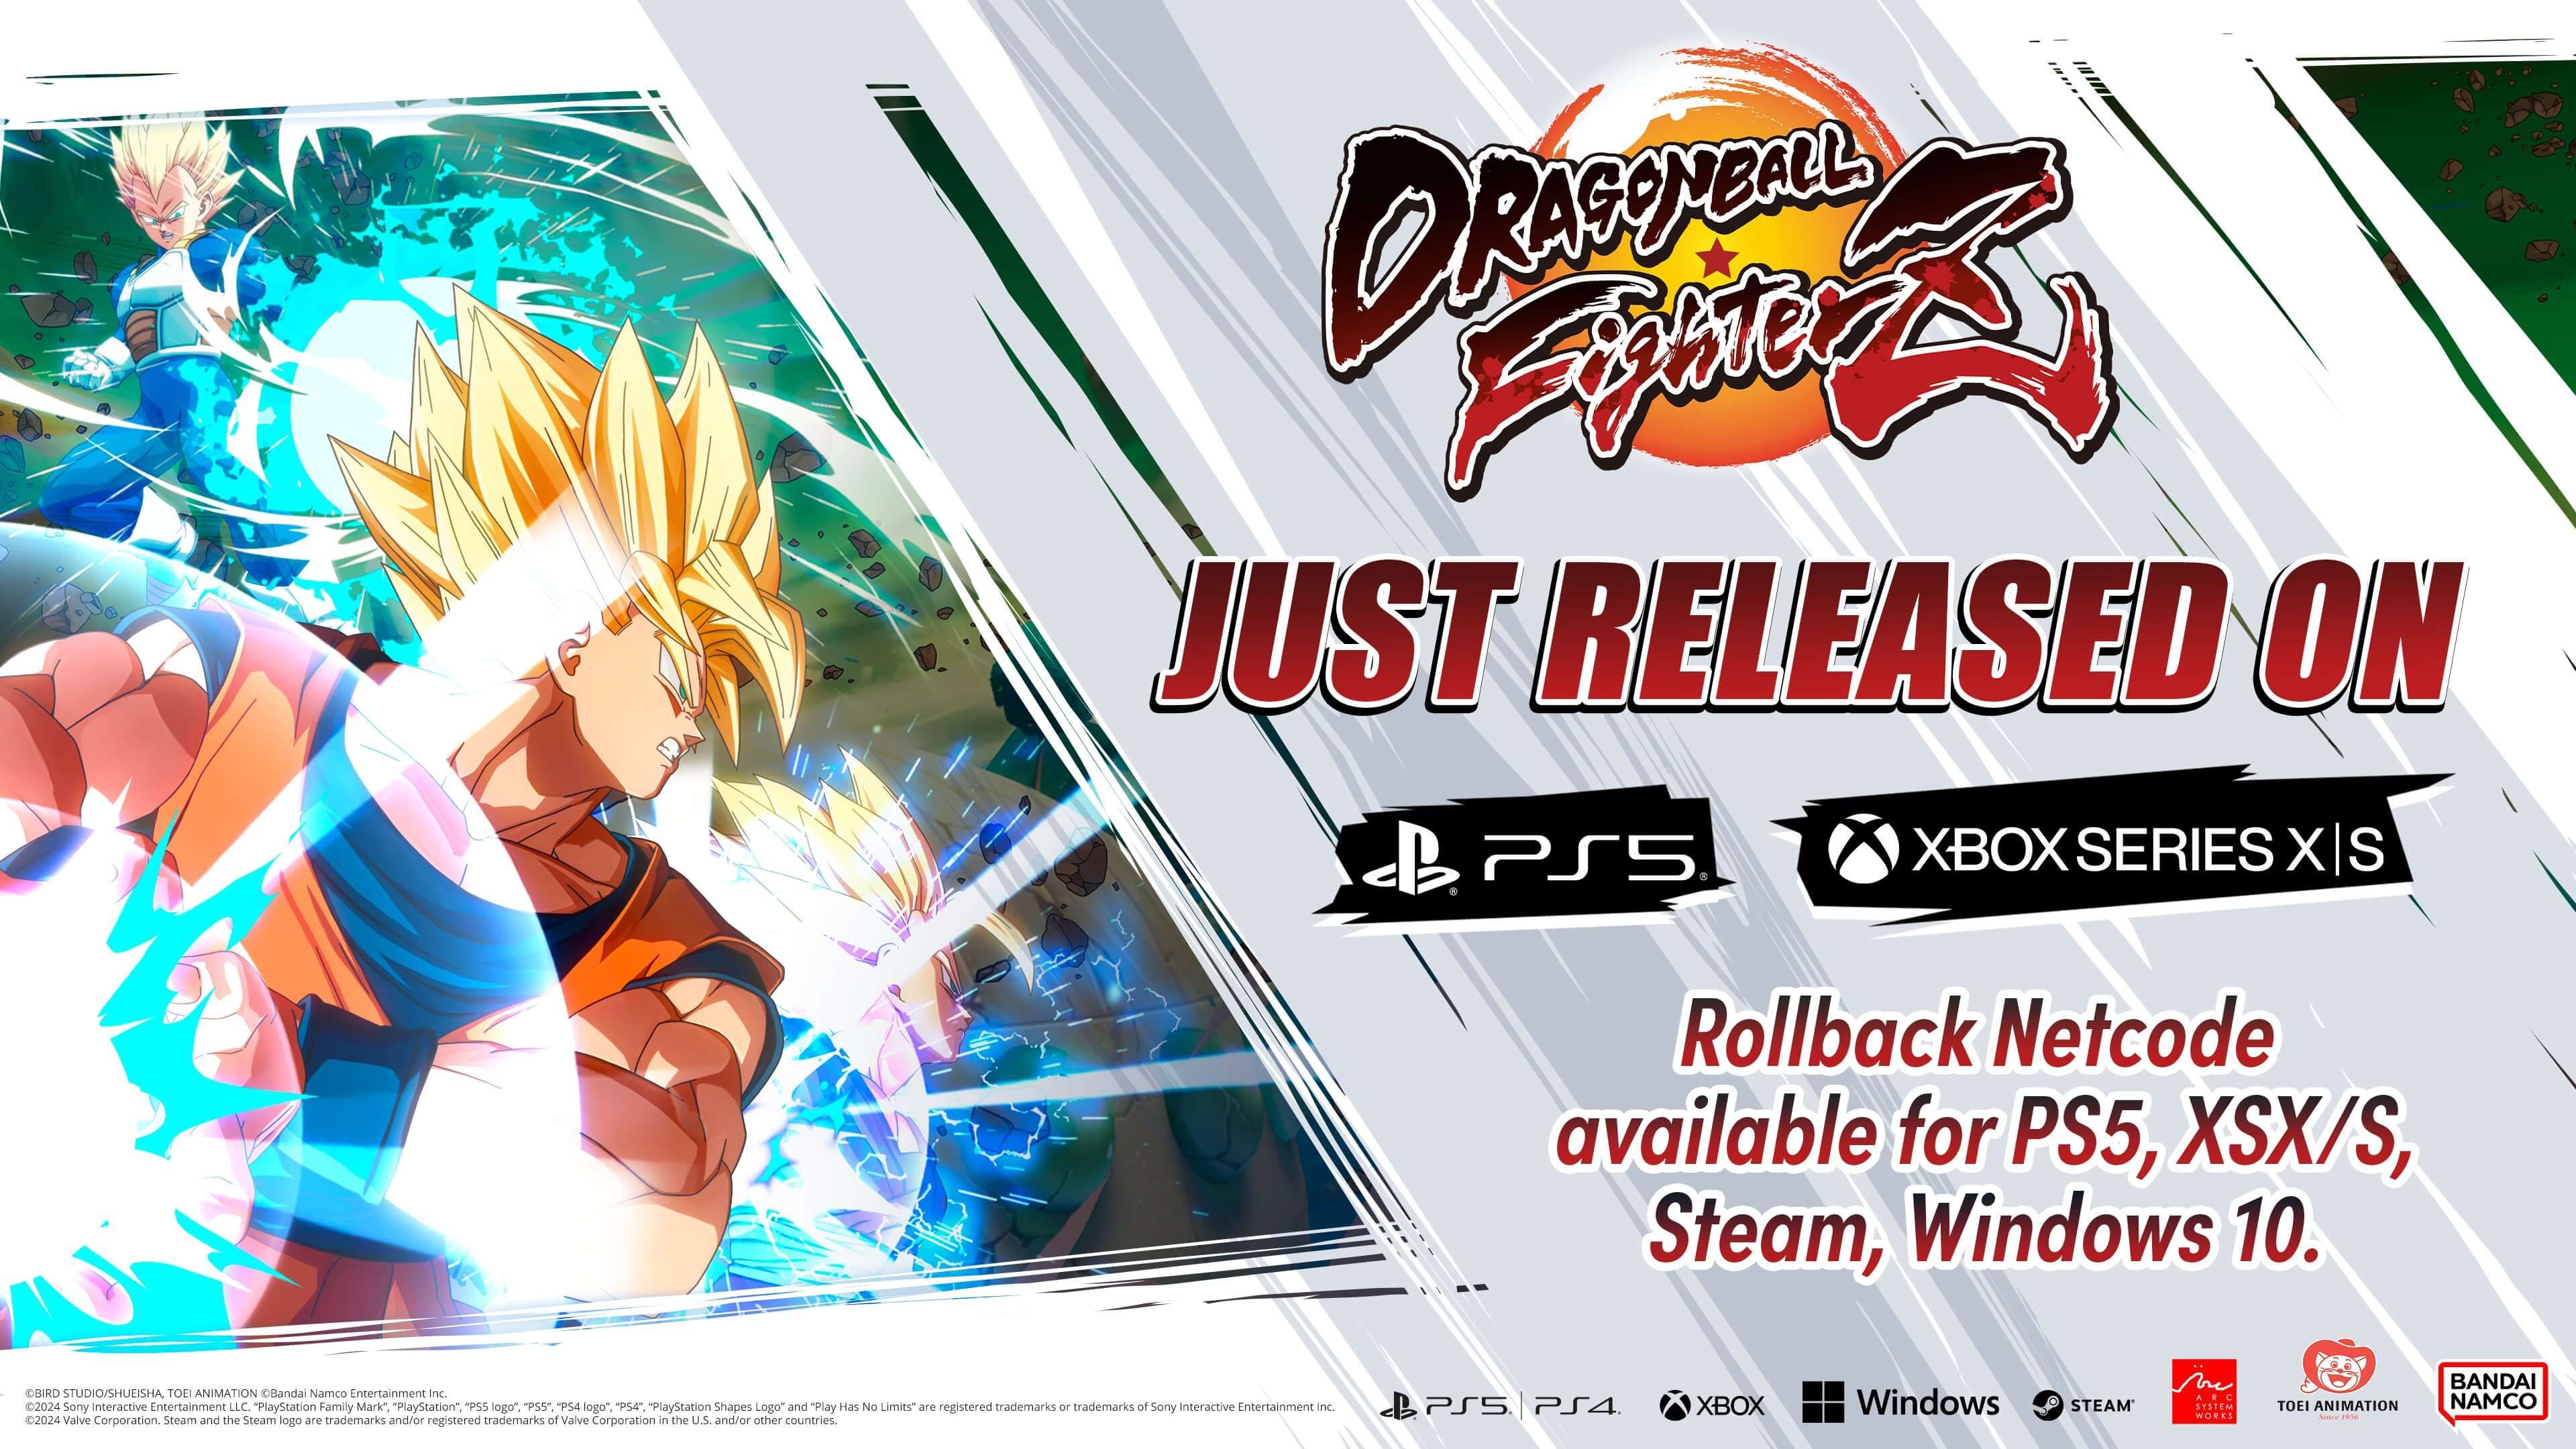 Dragon Ball FighterZ To Release on PS5 With Rollback Tomorrow